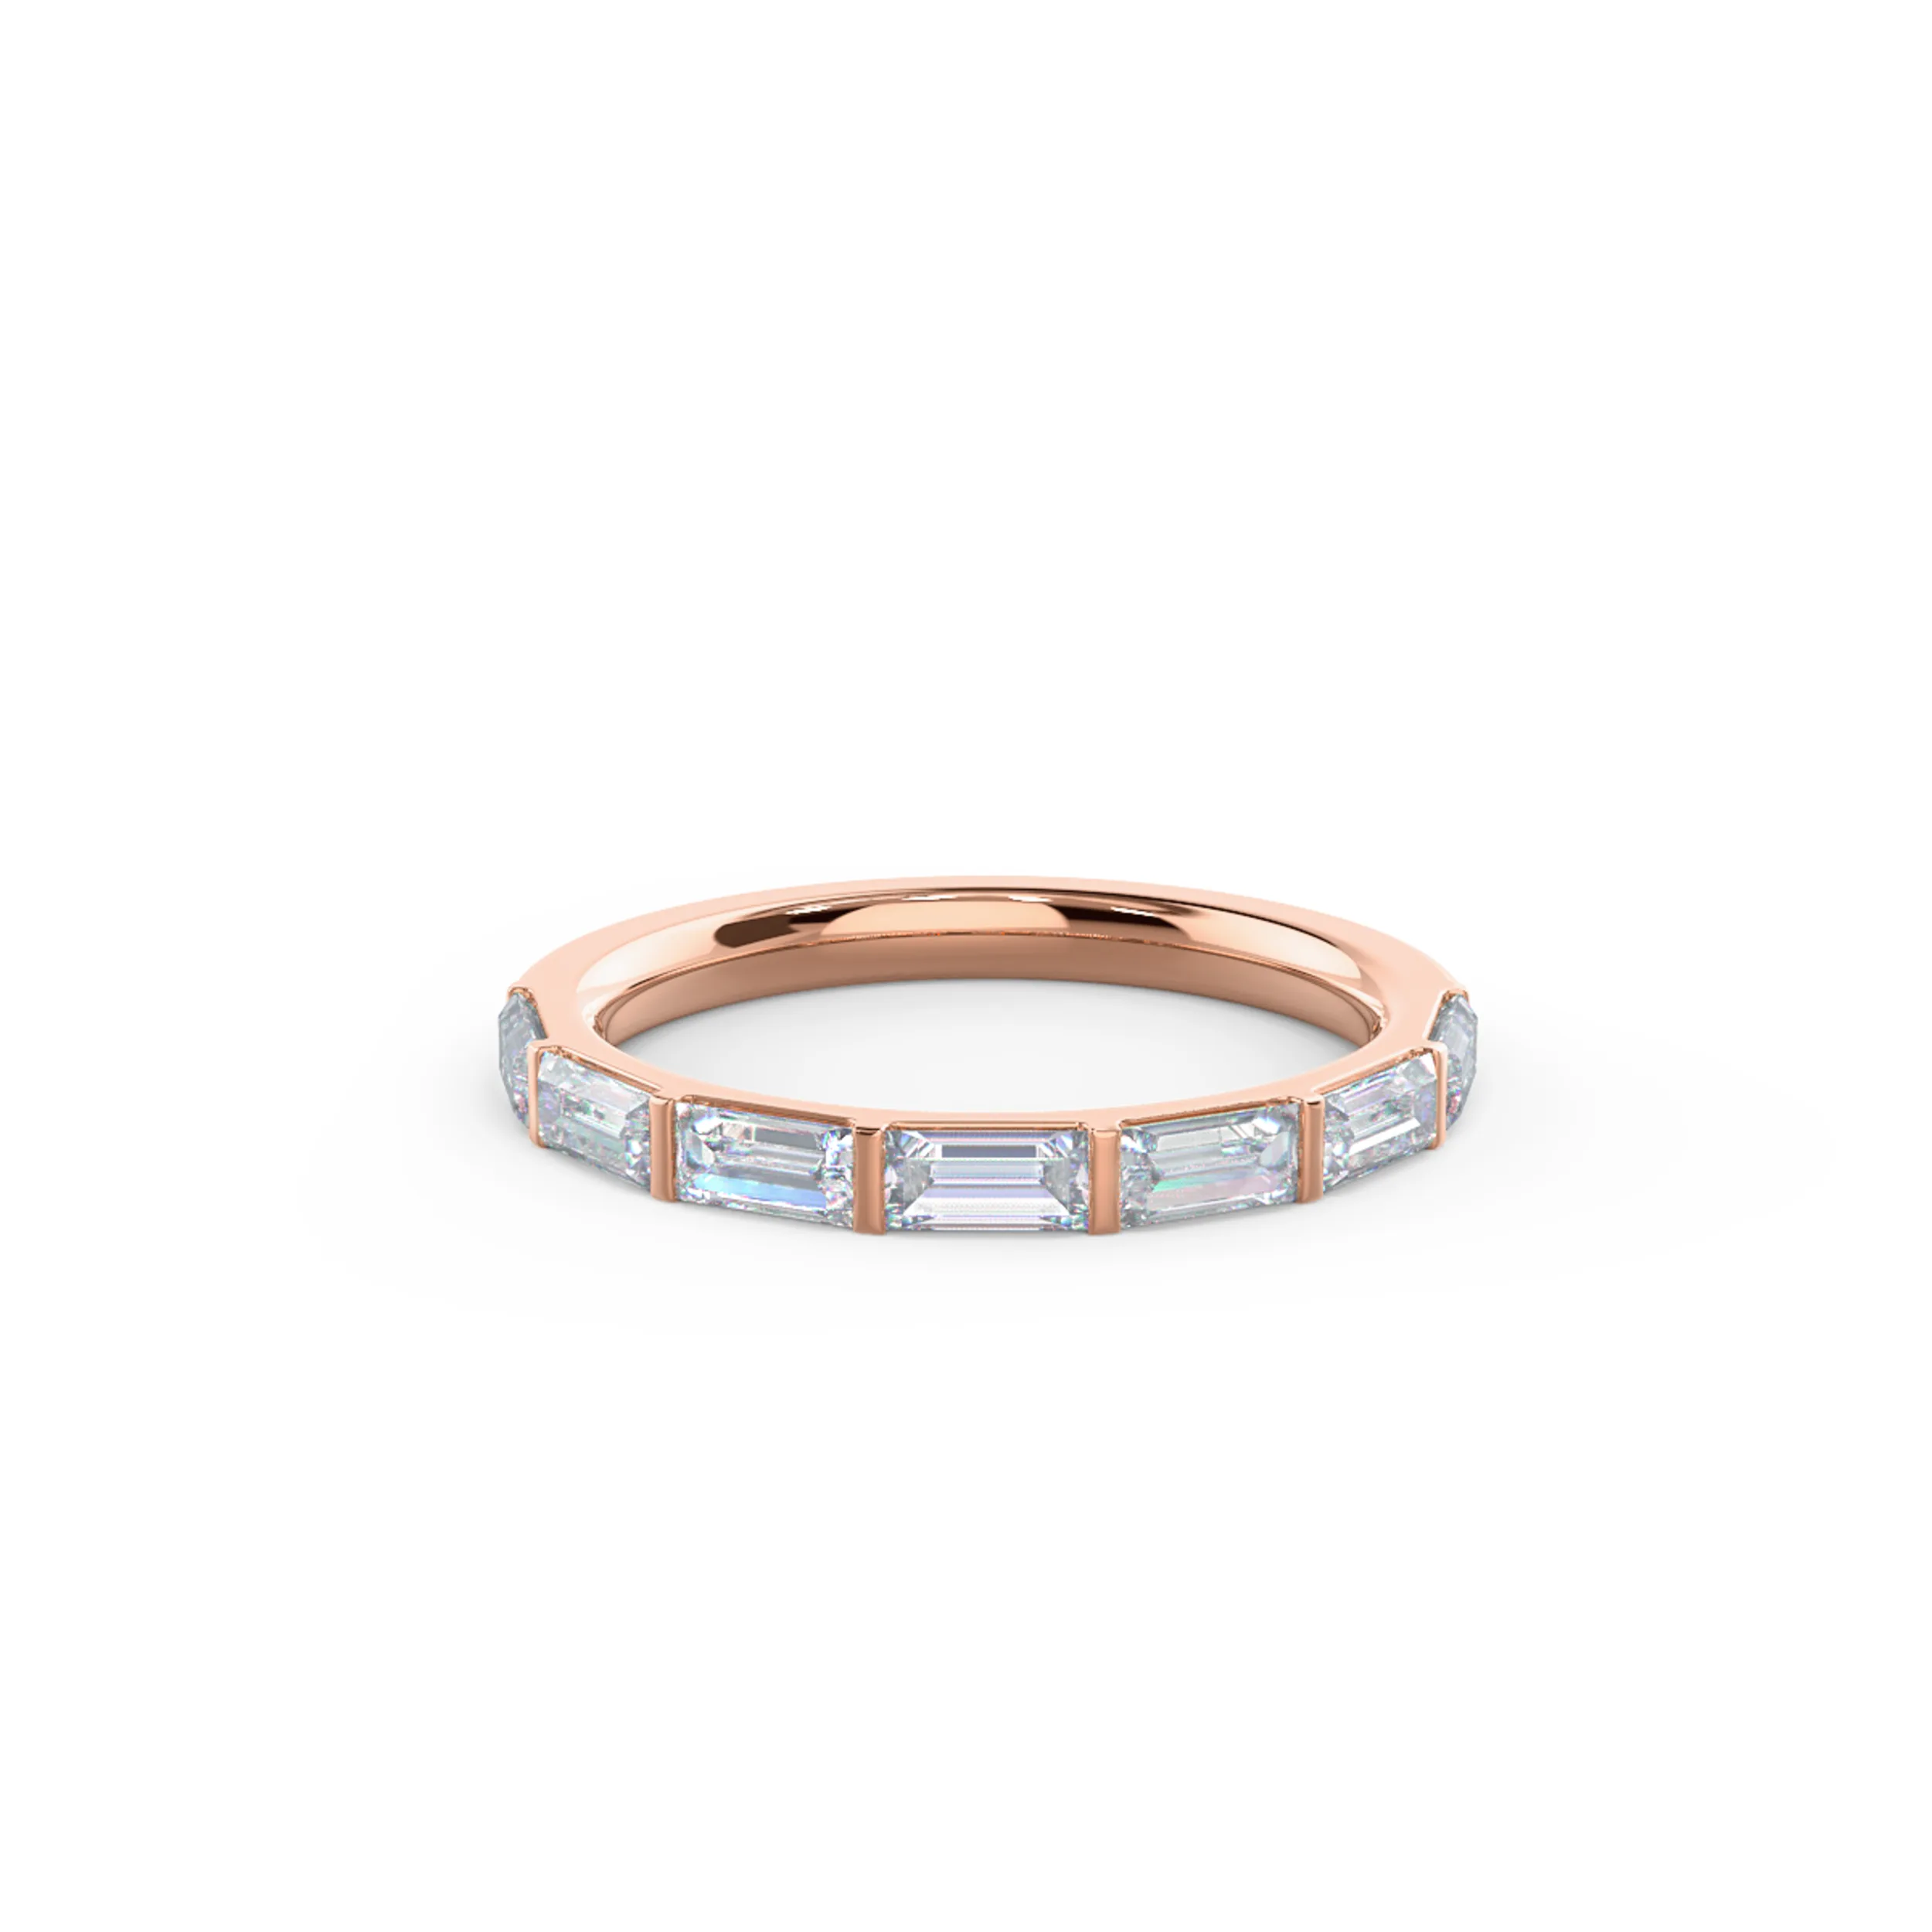 0.7 ct Man Made Diamonds Baguette East-West Half Band in 14k Rose Gold (Main View)